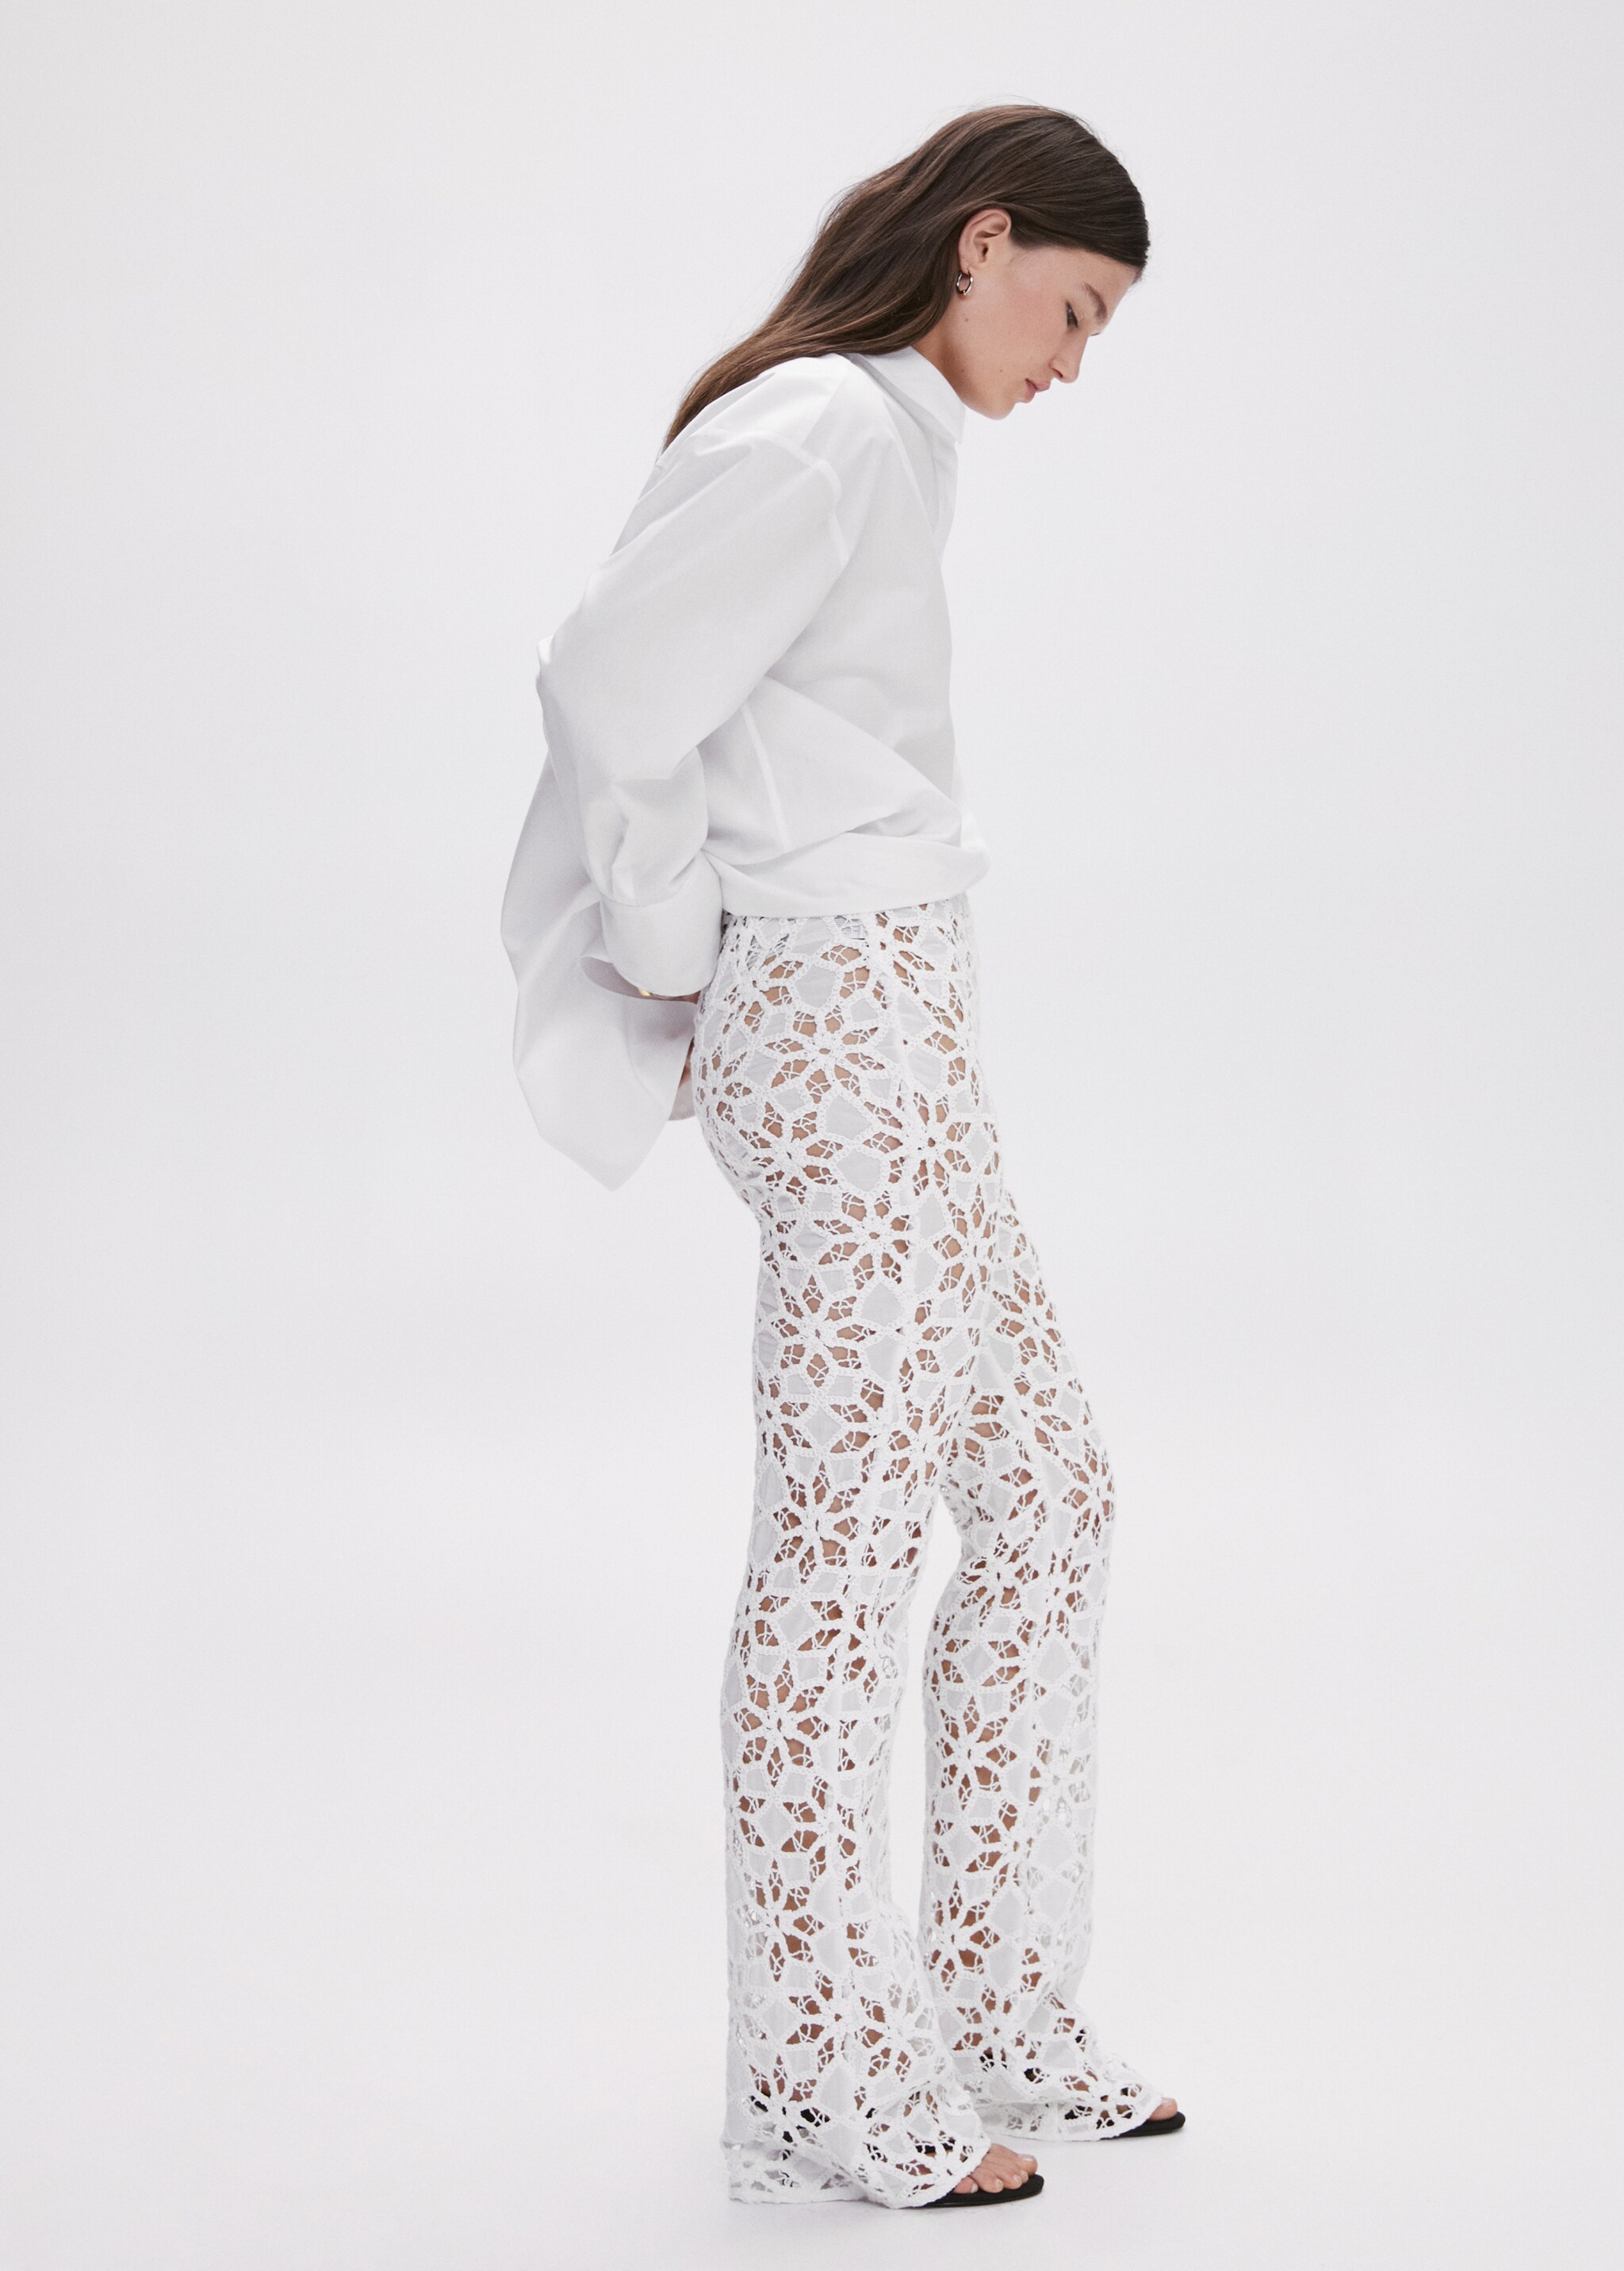 Crochet palazzo trousers - Details of the article 2